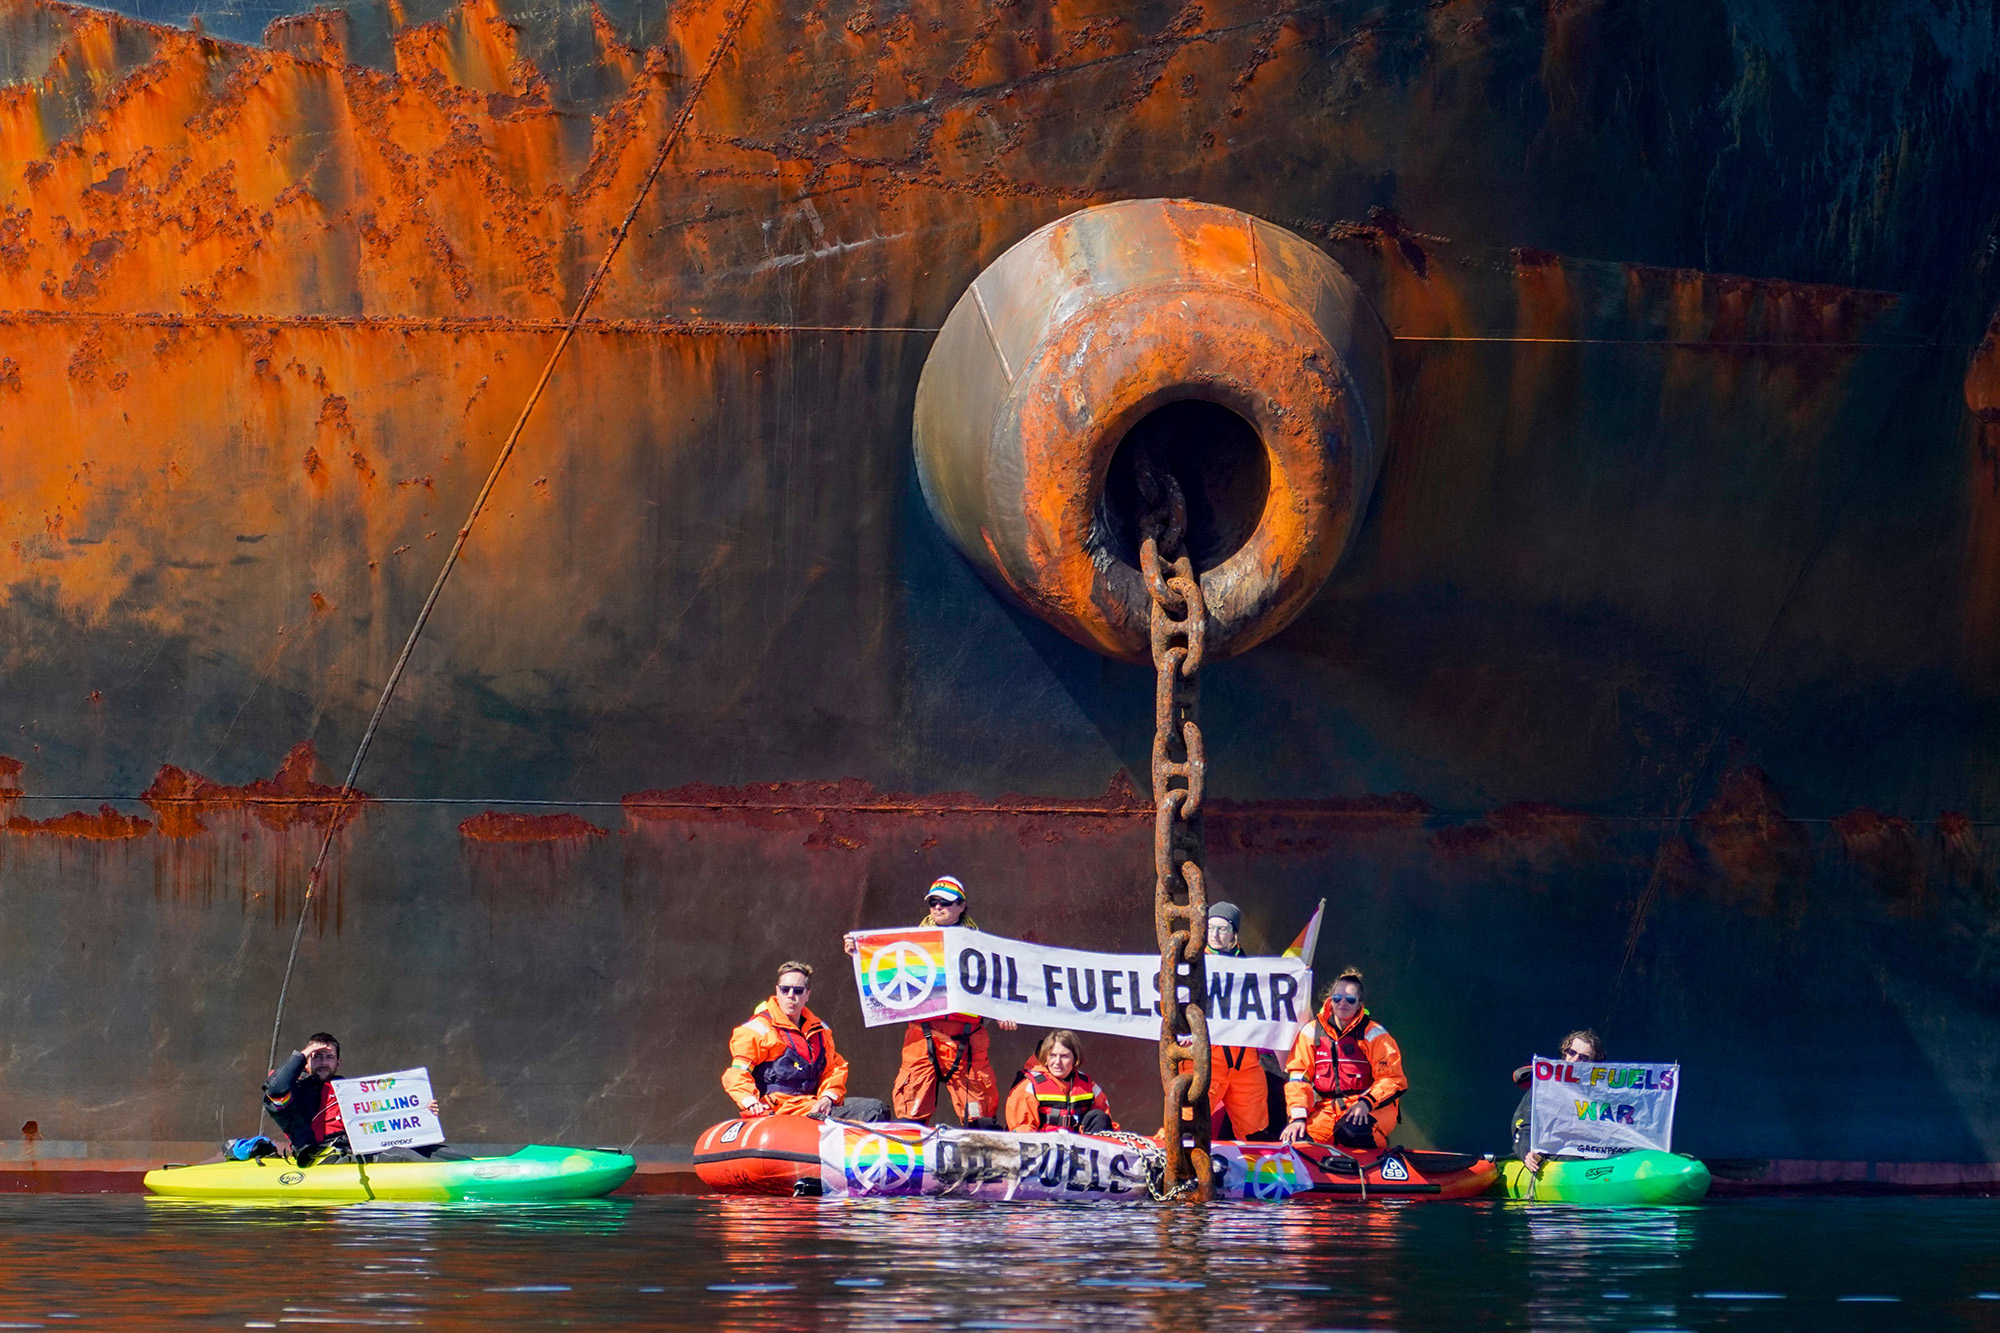 Greenpeace environmental activists are taking action against the Ust Luga, which is reported to be unloading Russian oil at the port of Aasgaardstrand, Norway, on April 25.